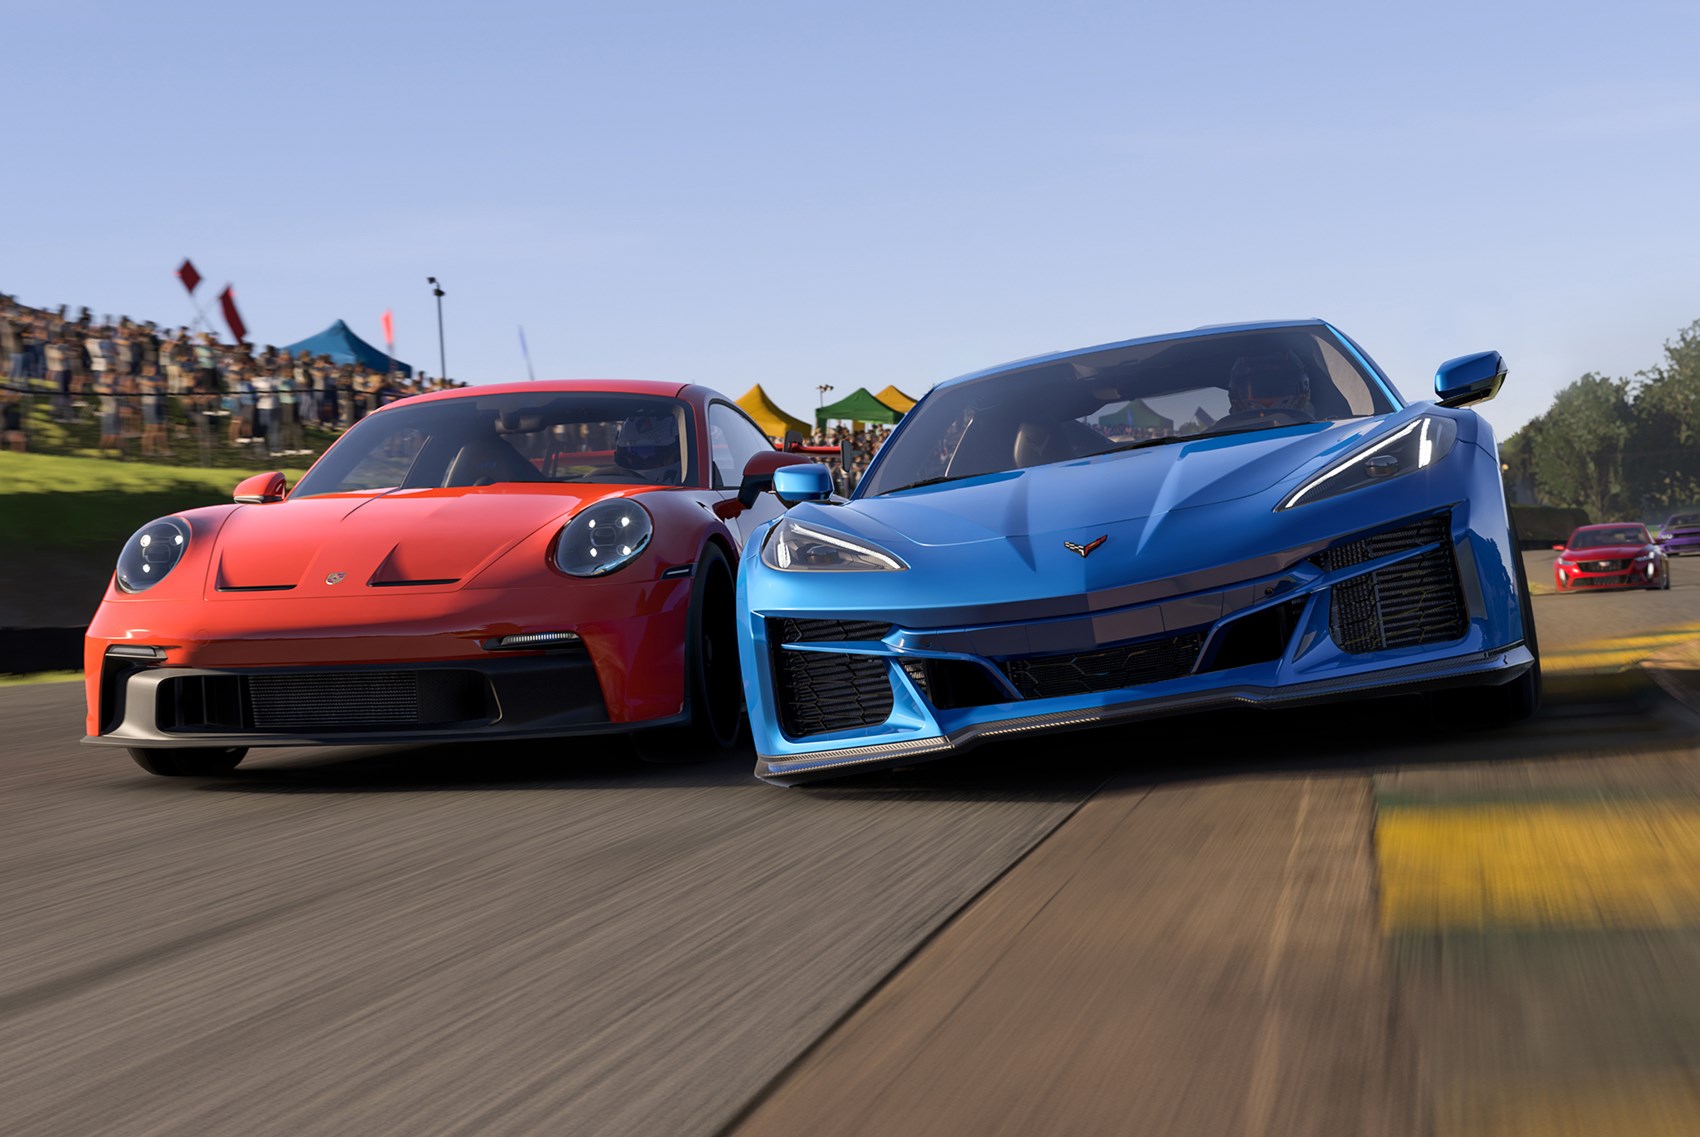 Forza Motorsport needs more personality to its racing to overtake Gran  Turismo 7